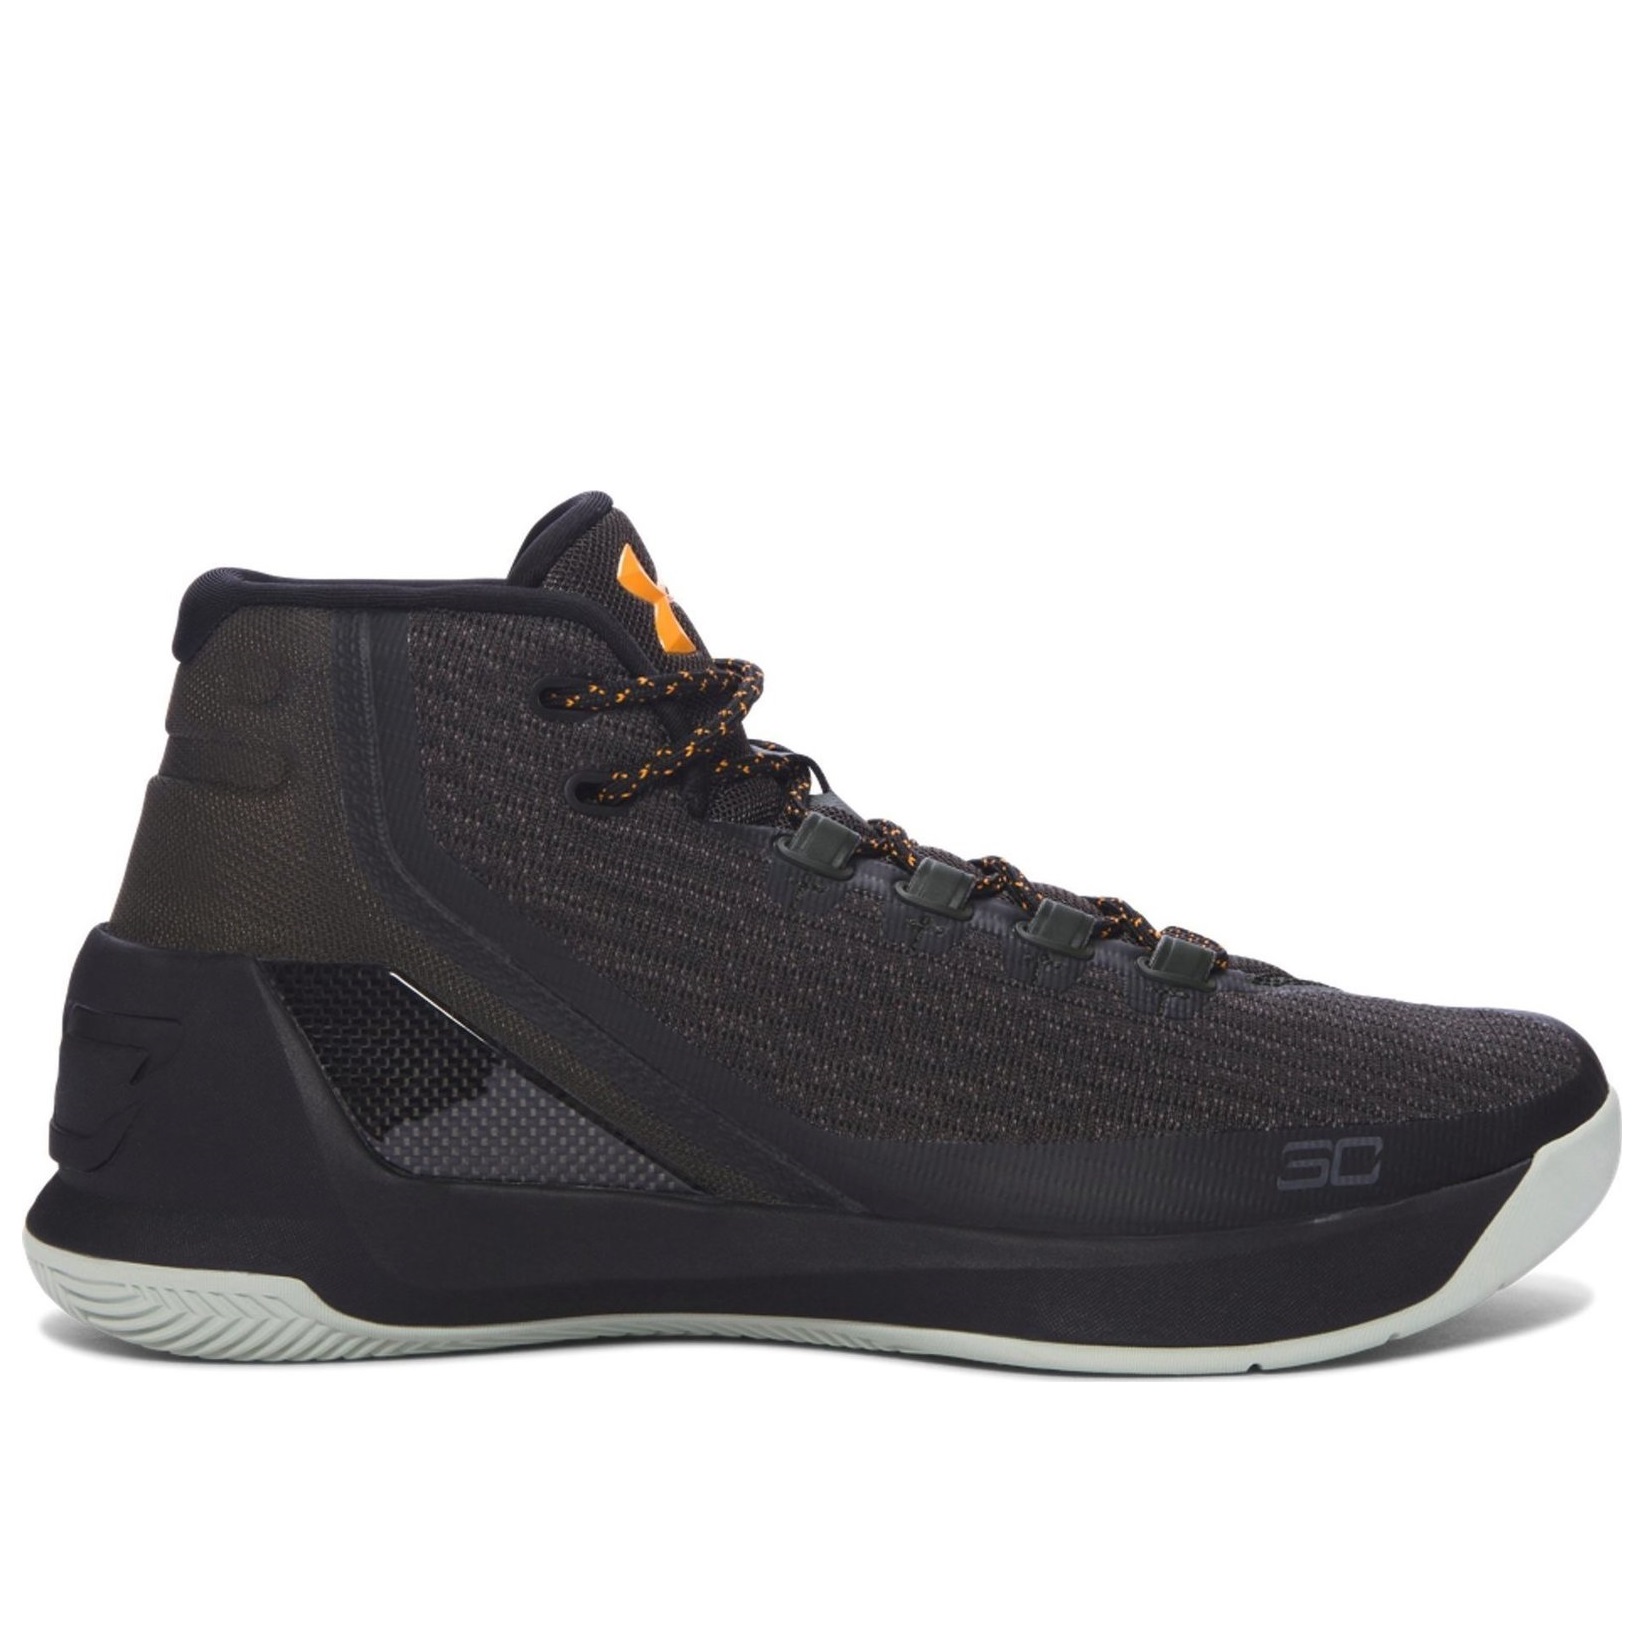 Basketball Shoes -  under armour Curry 3 9279